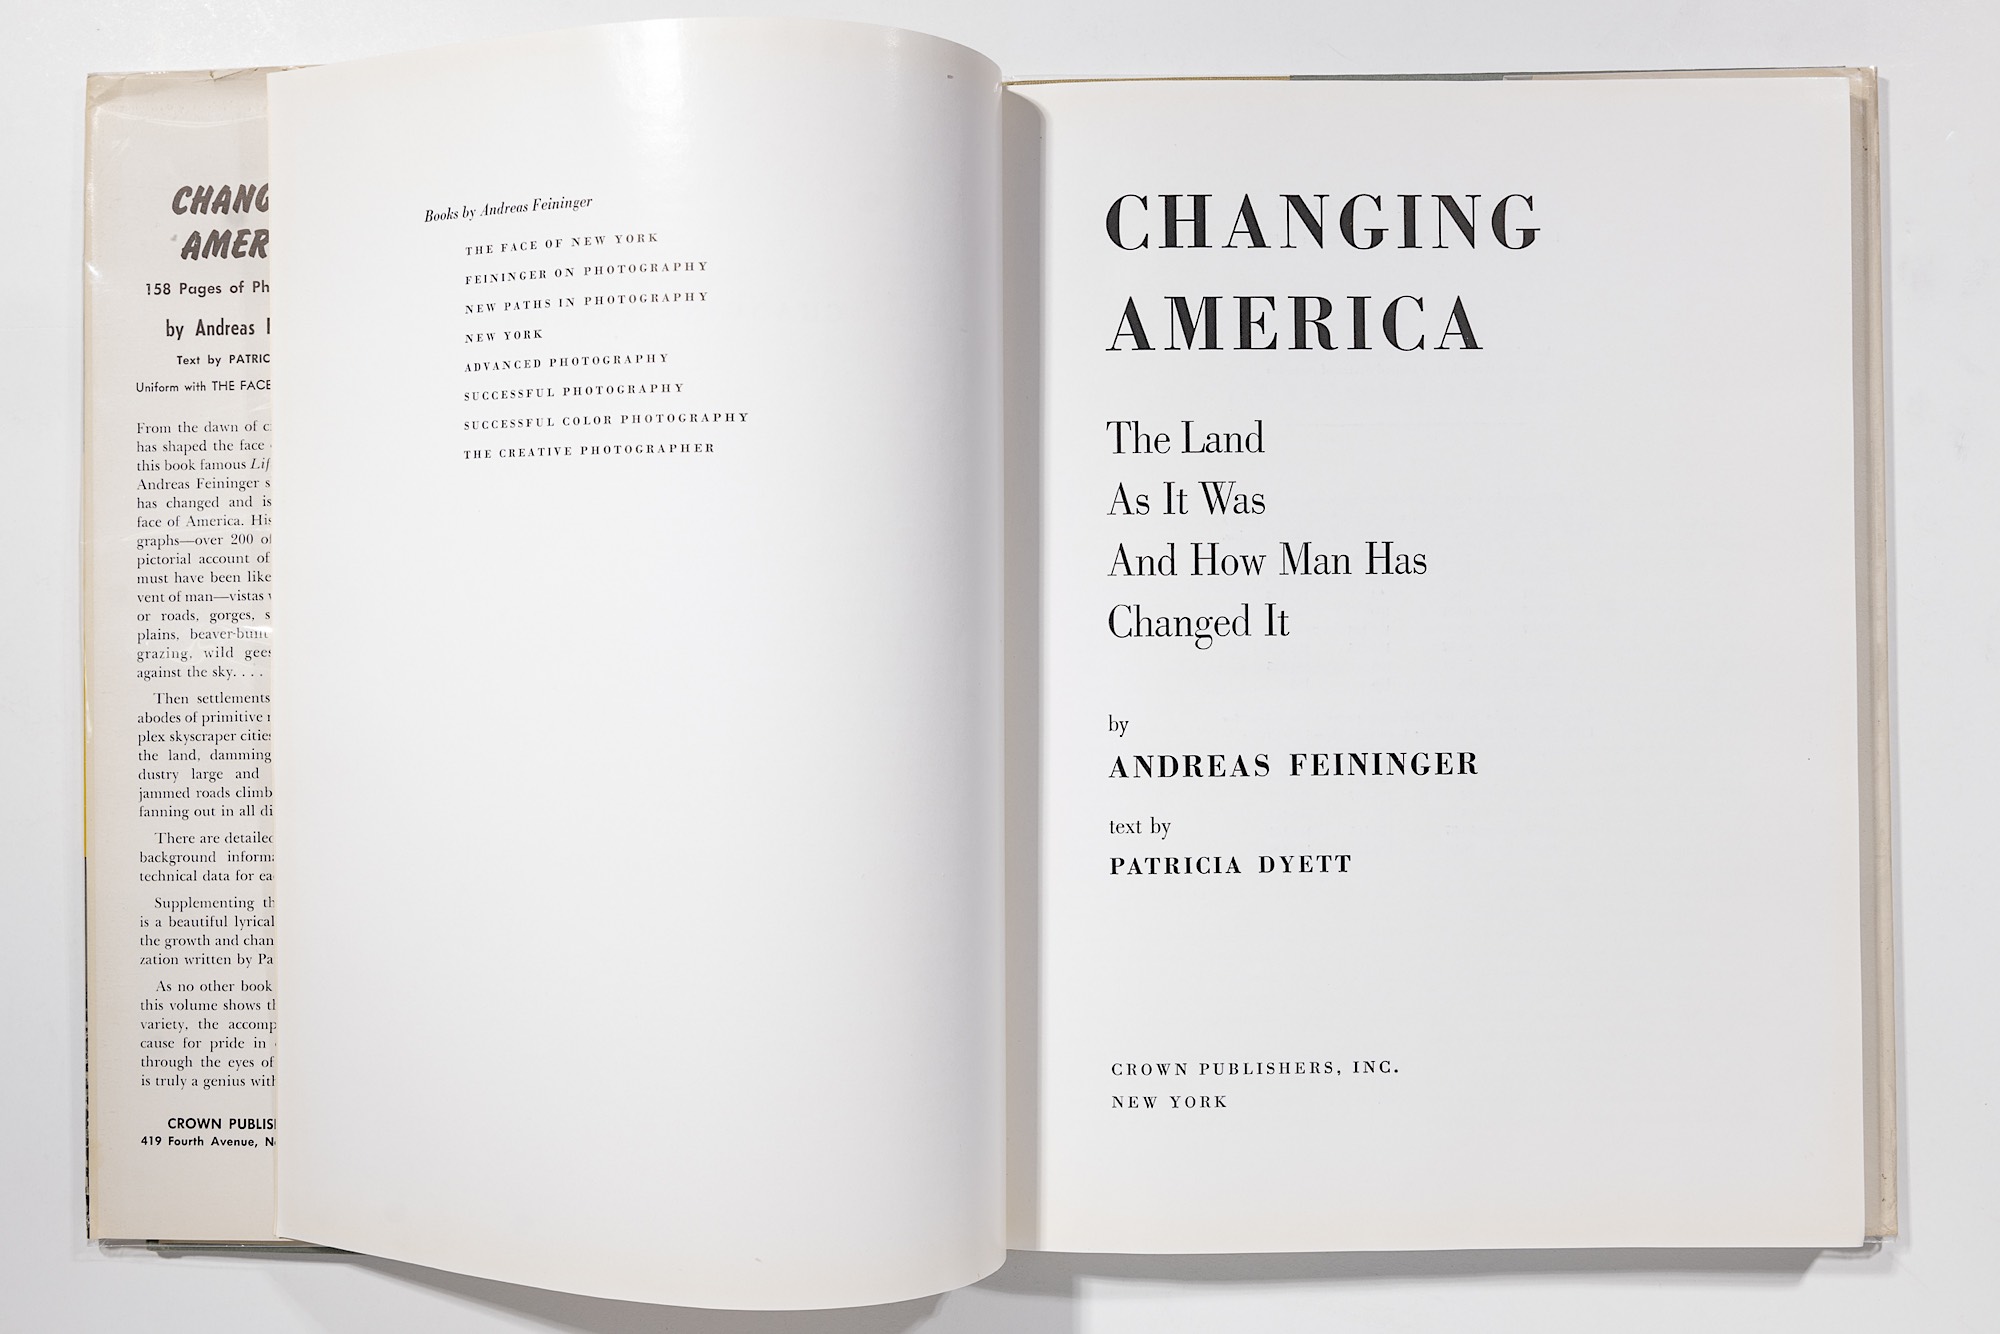 Andreas Feininger - Changing America: The Land As It Was and How Man Has Changed It Image 11